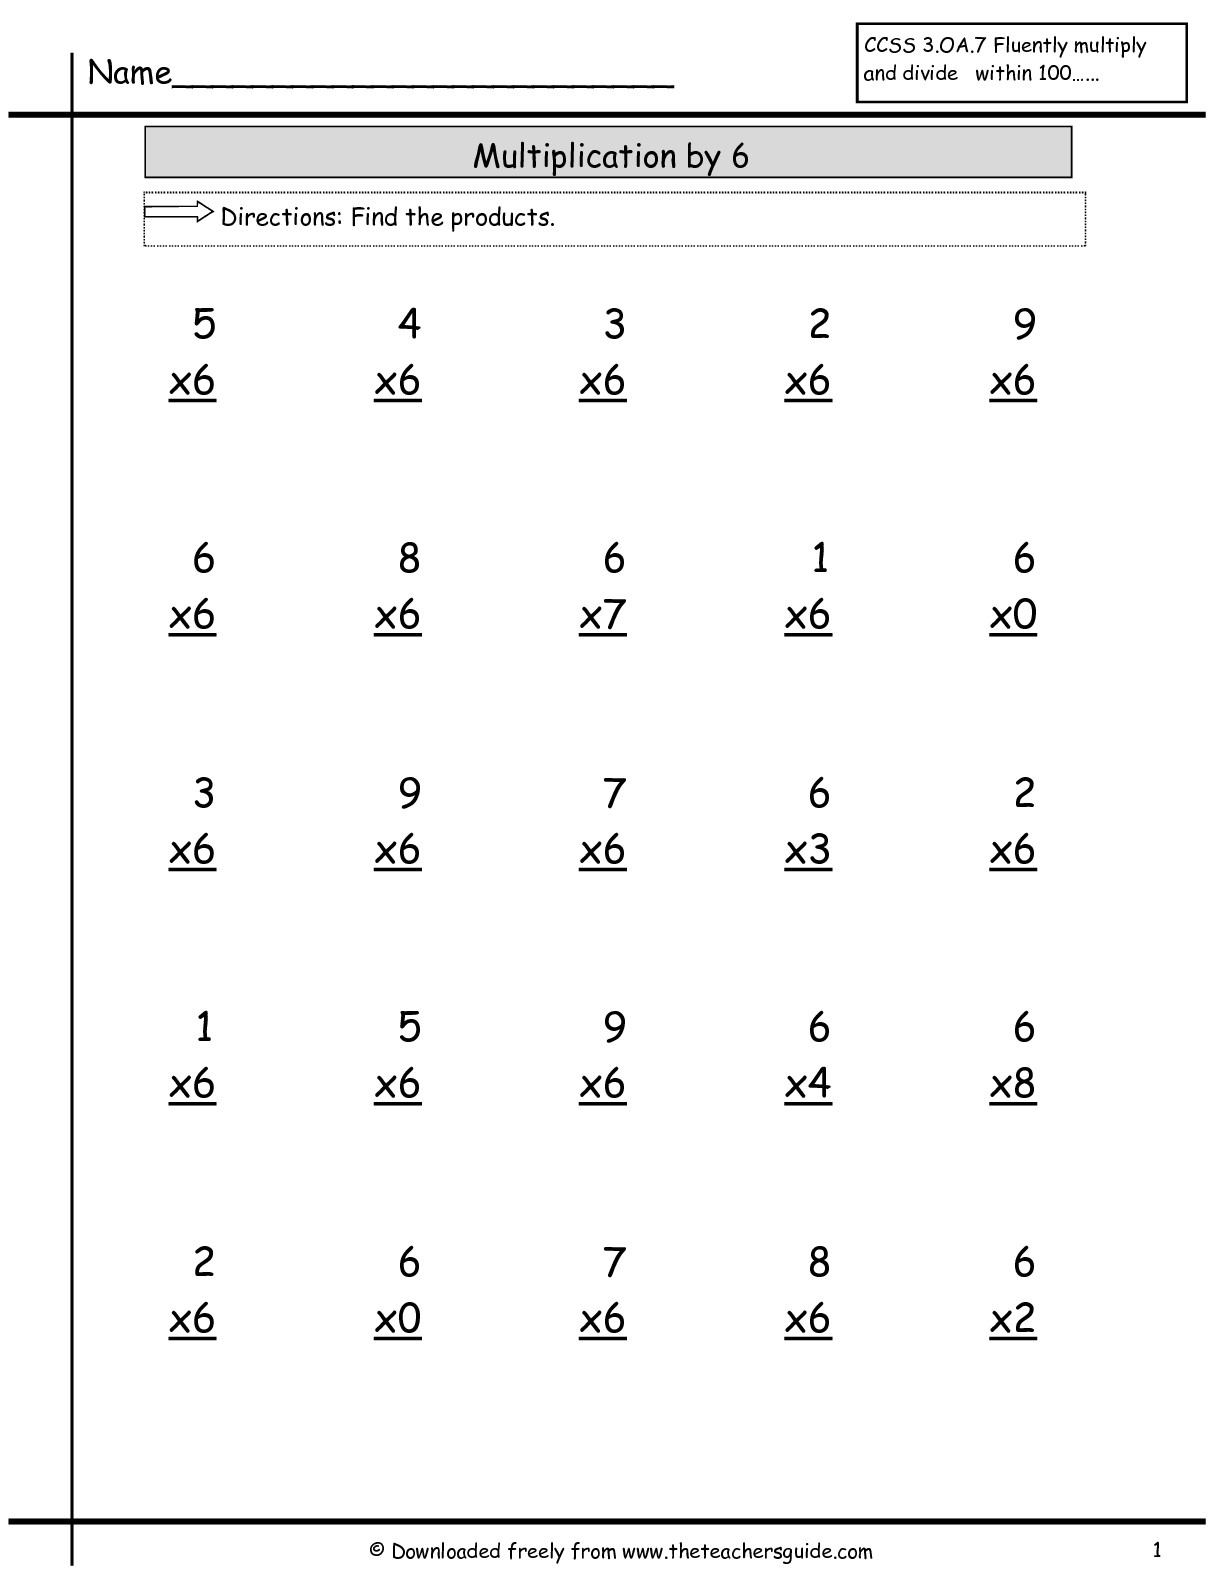 Multiplication Facts Worksheets From The Teacher's Guide in Multiplication Worksheets Up To 6